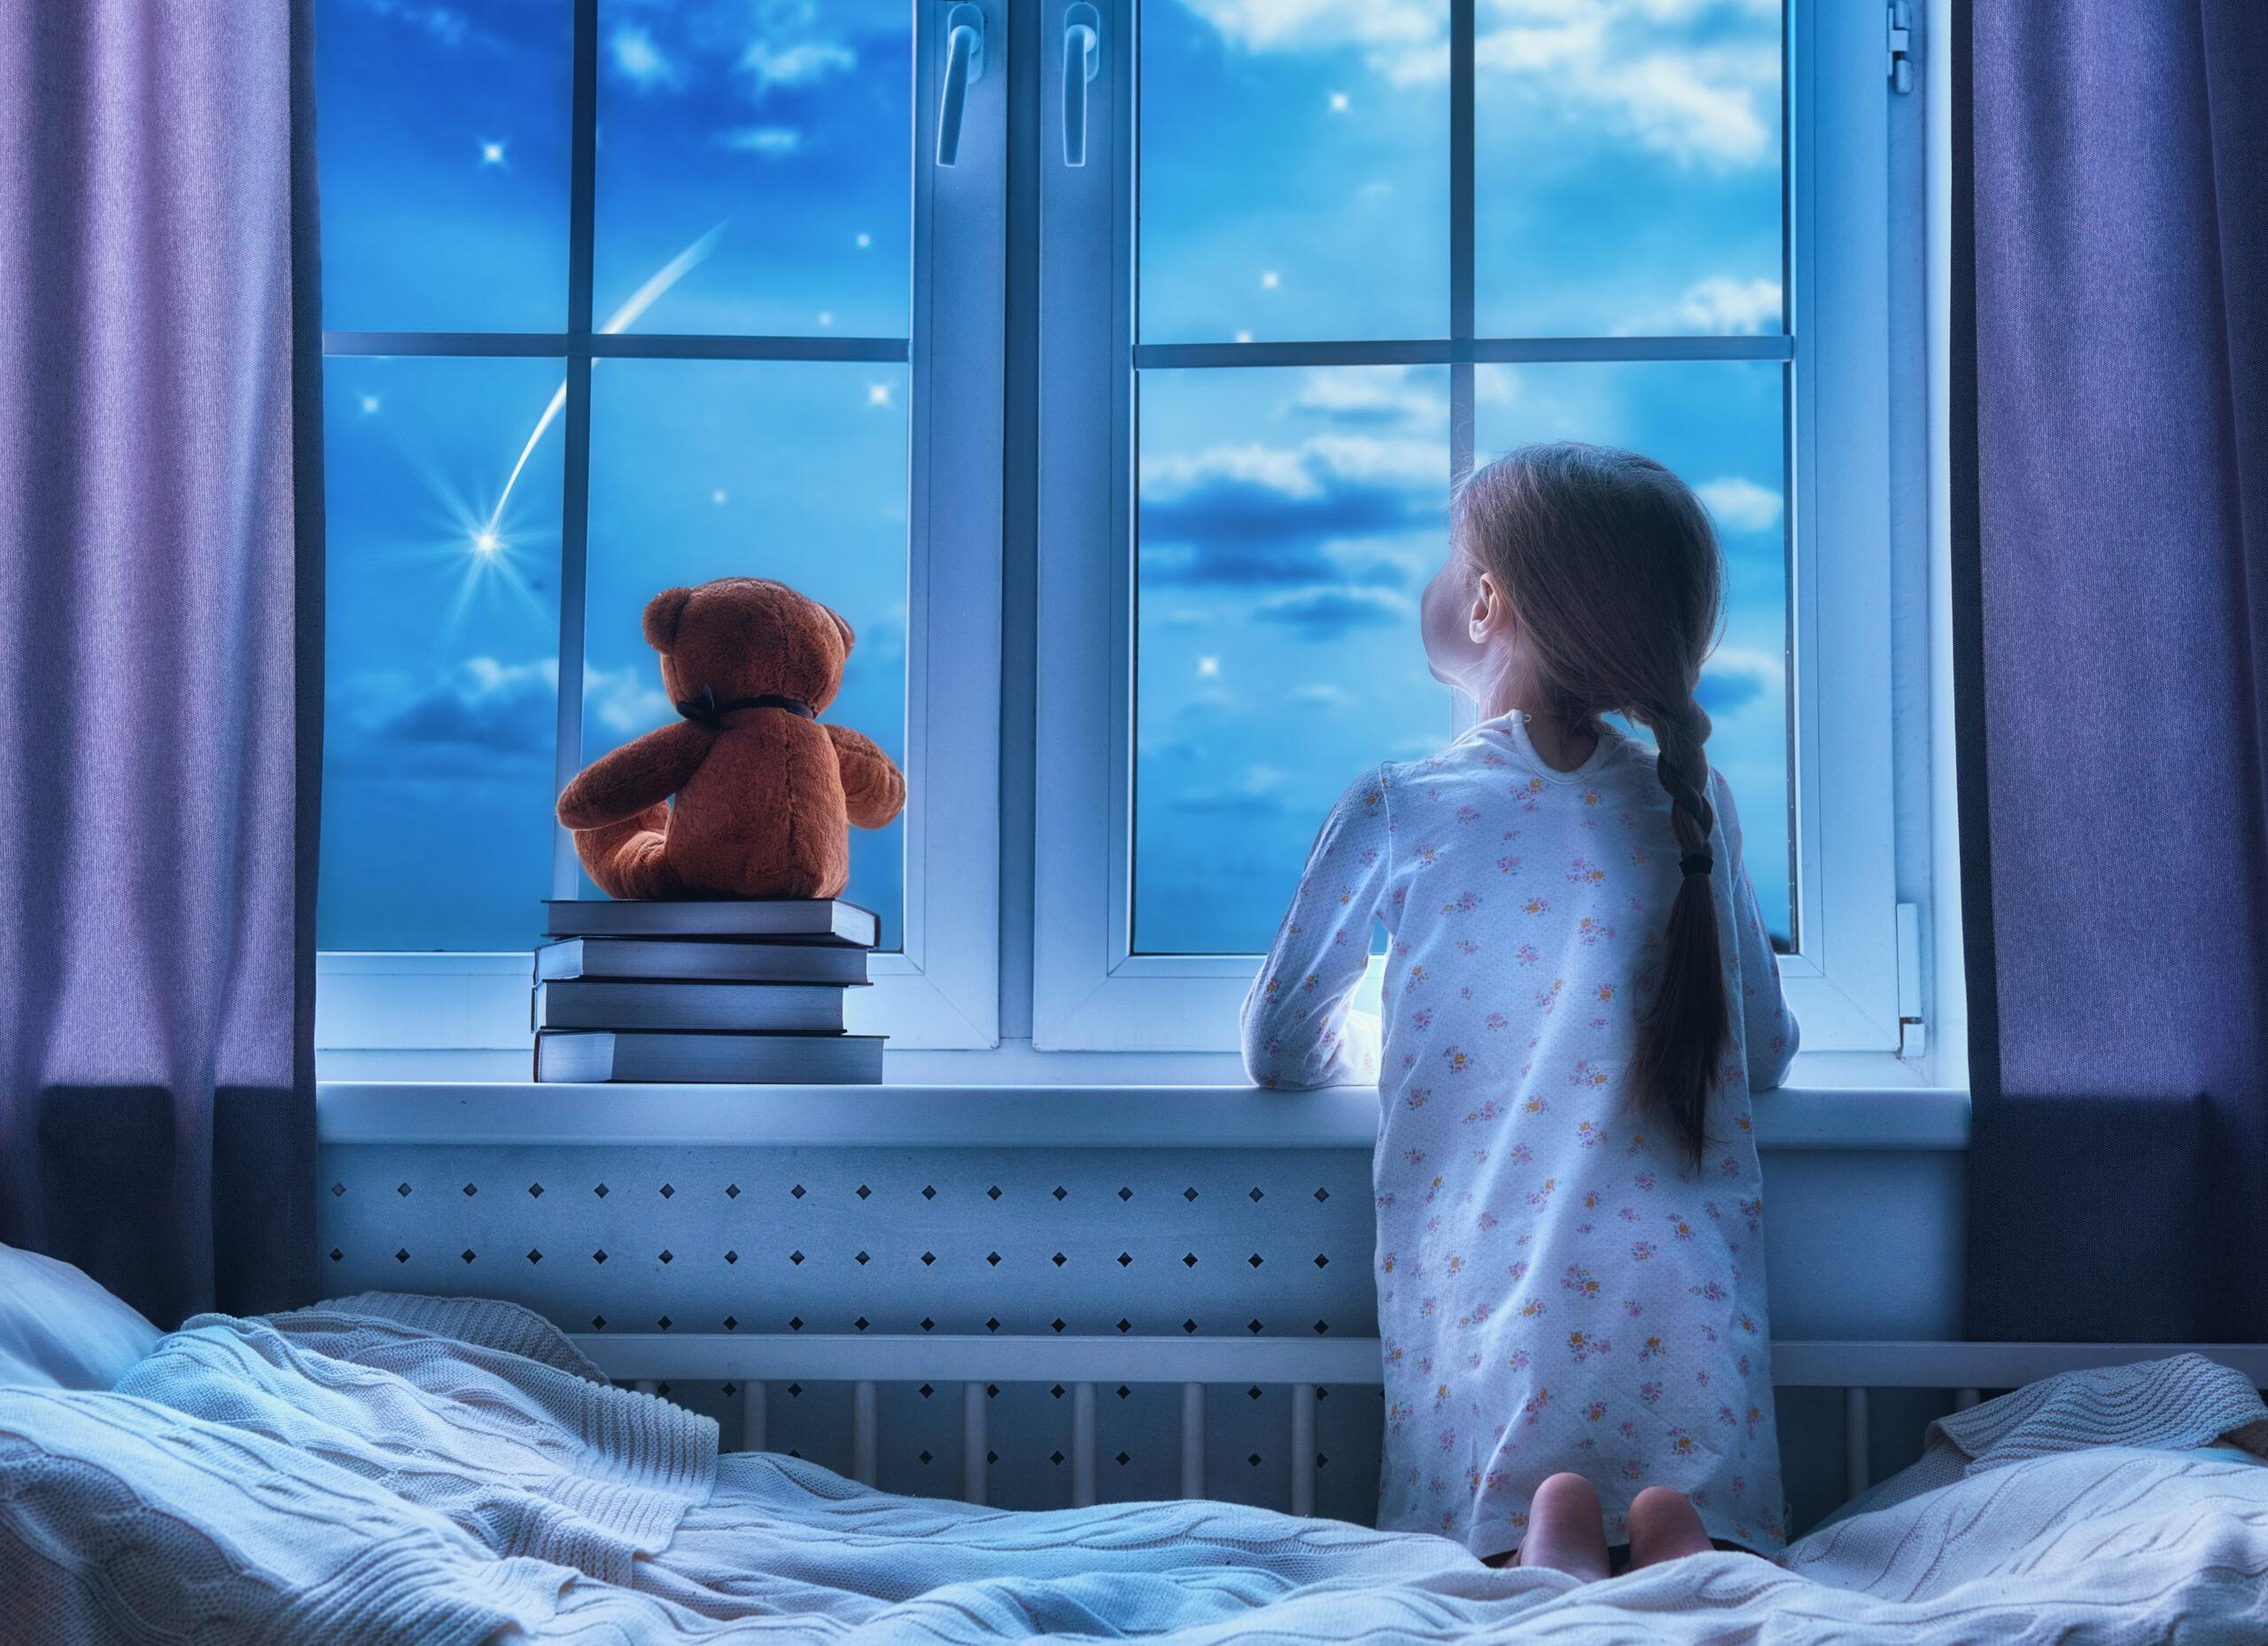 A little girl is sitting in bed looking out the window.